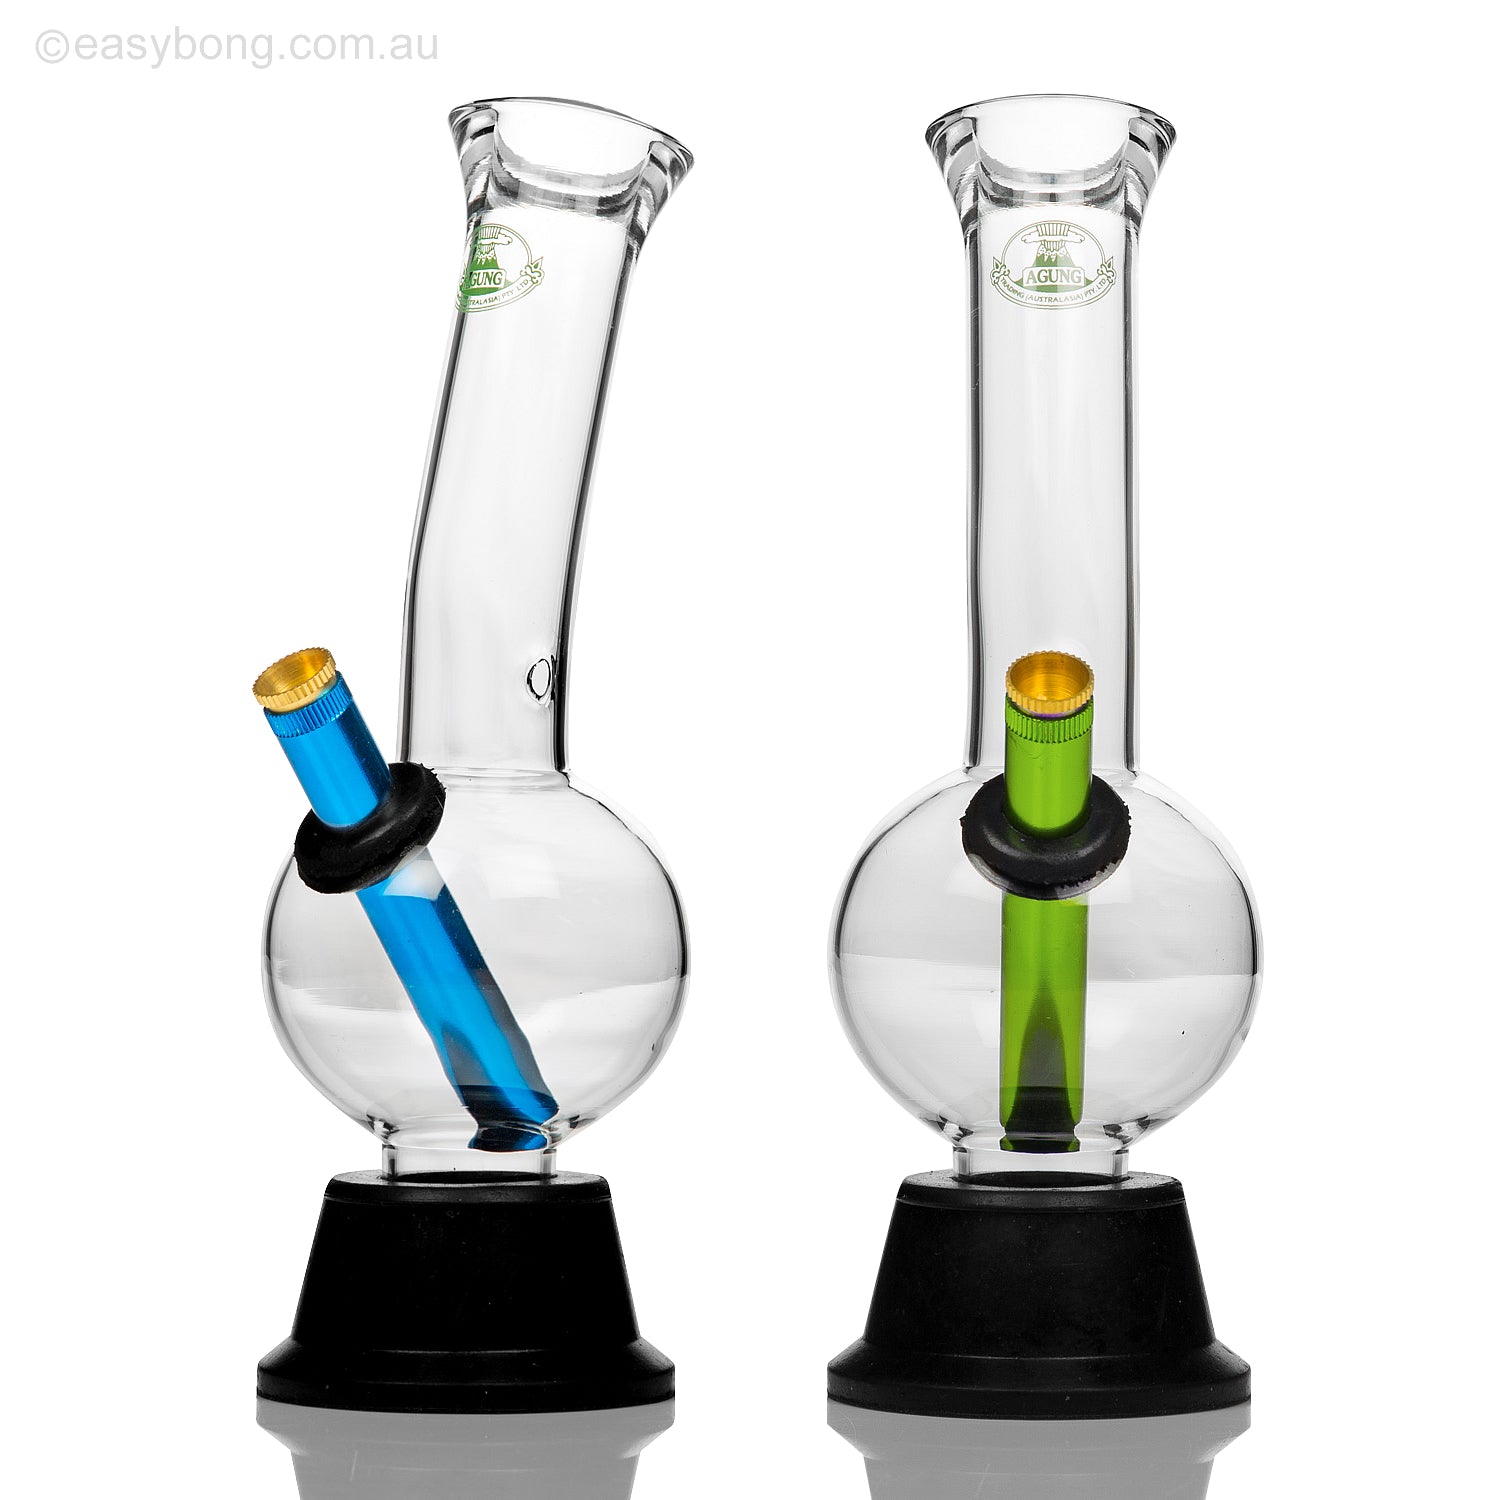 Agung Aussie style glass bong with bomza stem.